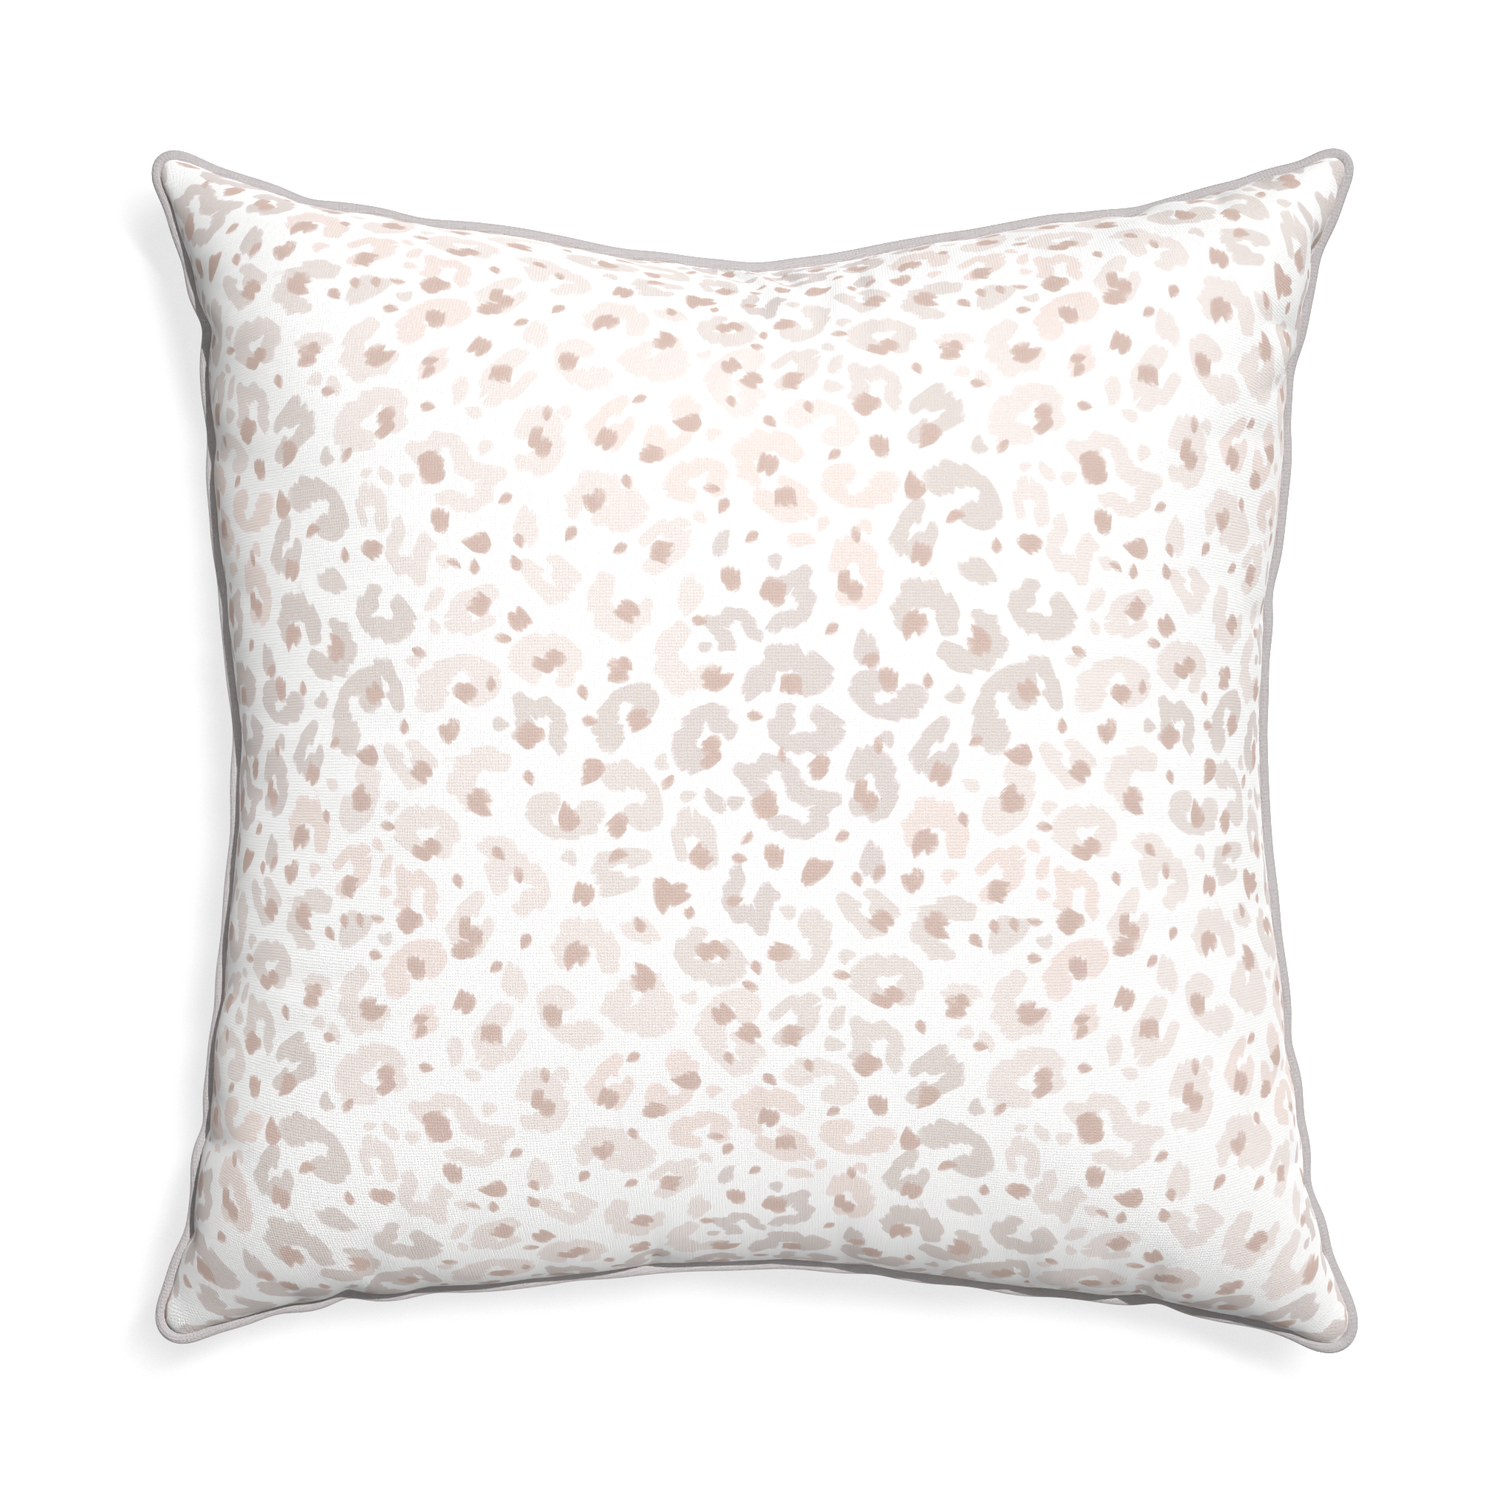 Euro-sham rosie custom beige animal printpillow with pebble piping on white background